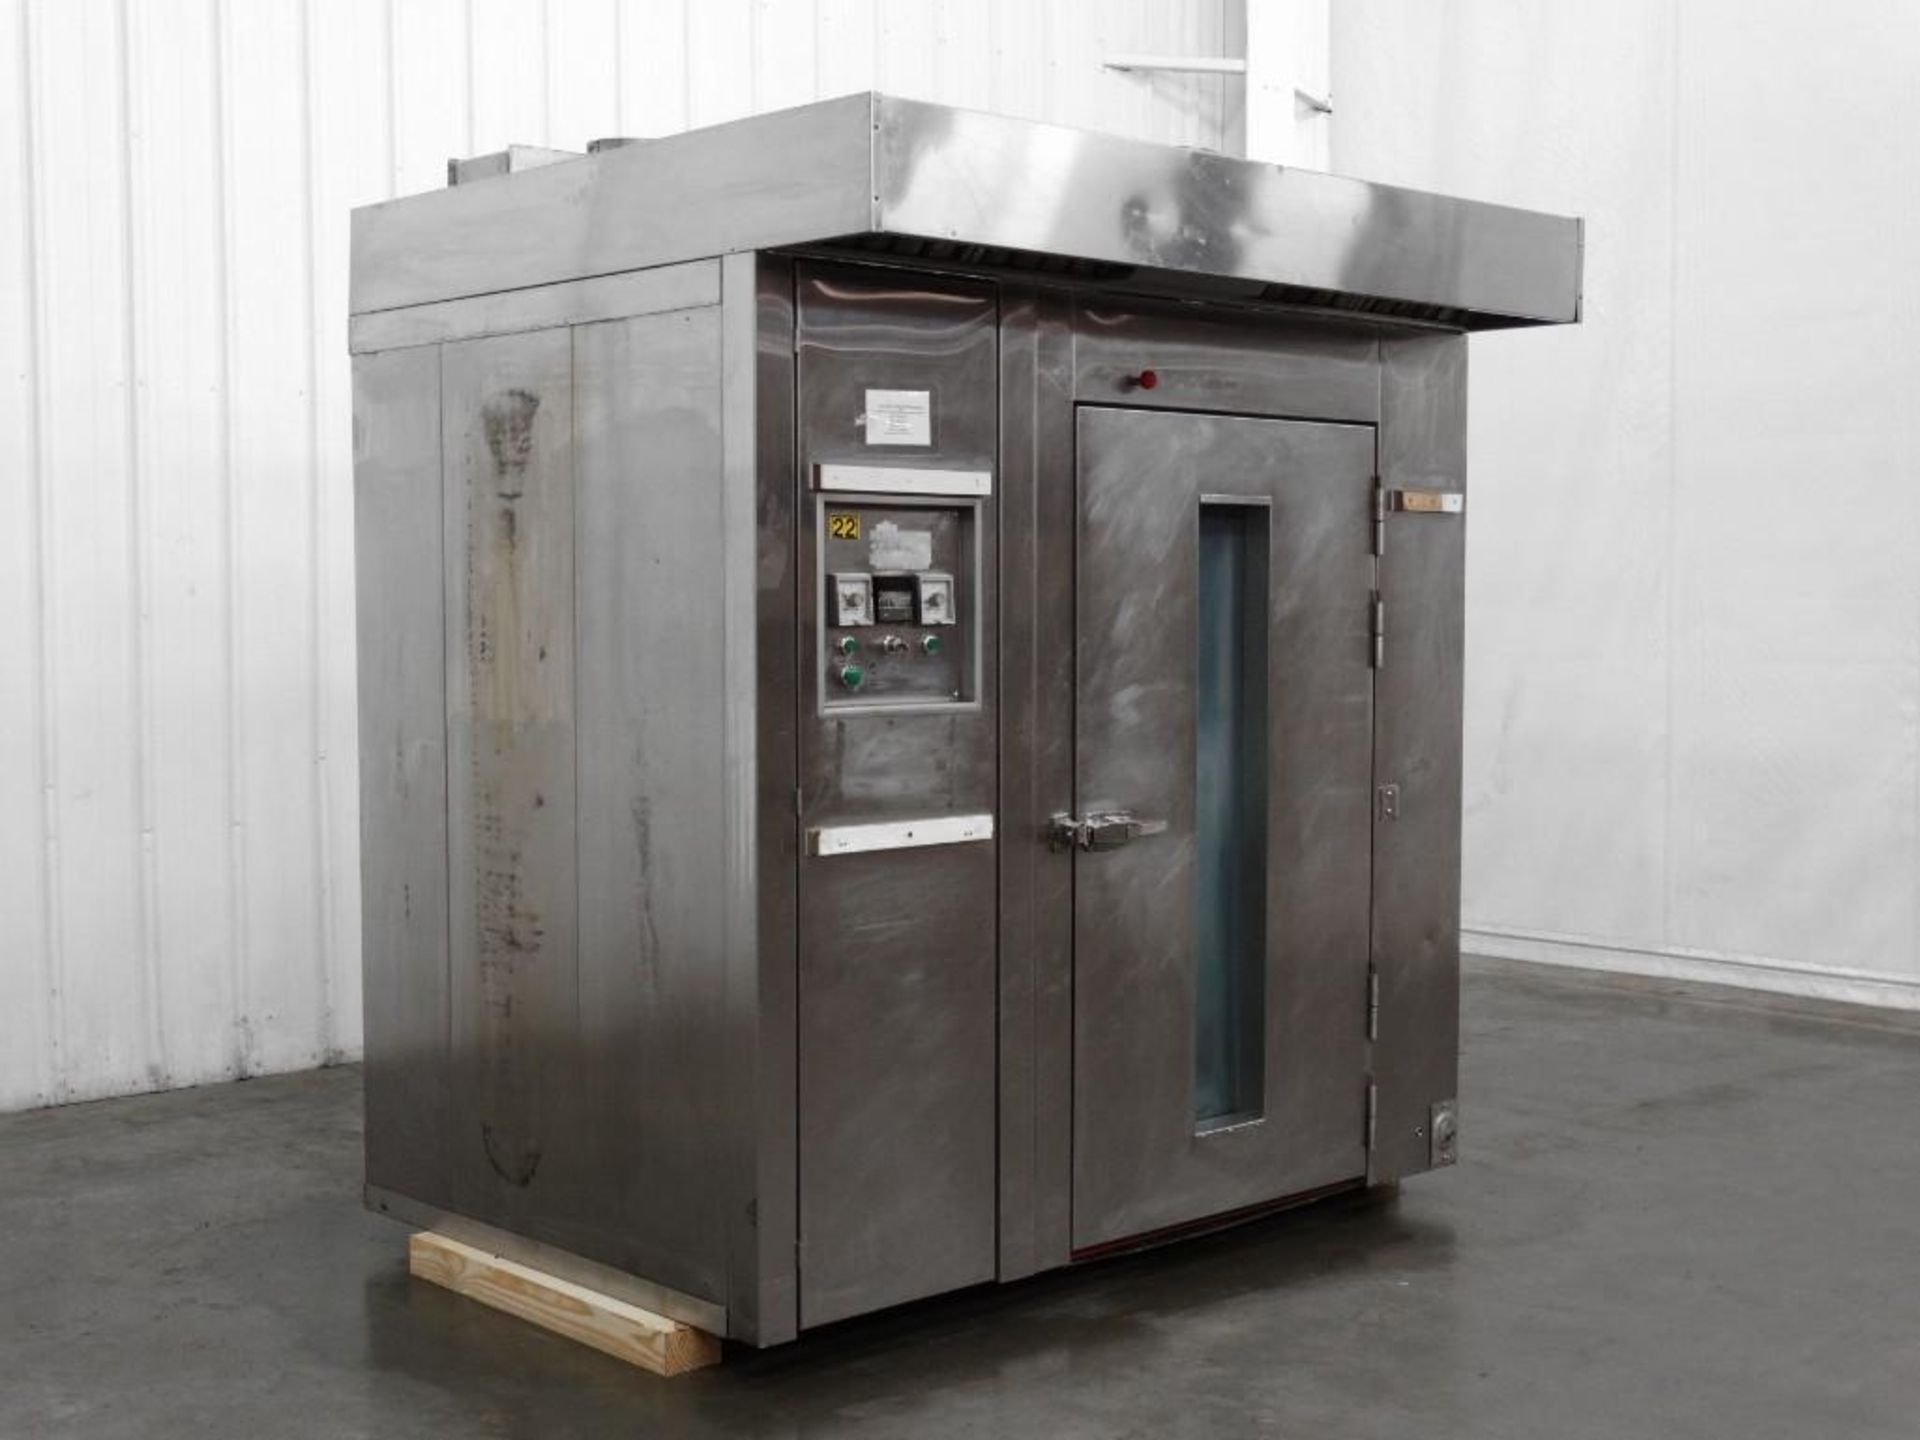 Baxter OV200G-M2 Double Rack Oven - Image 3 of 11